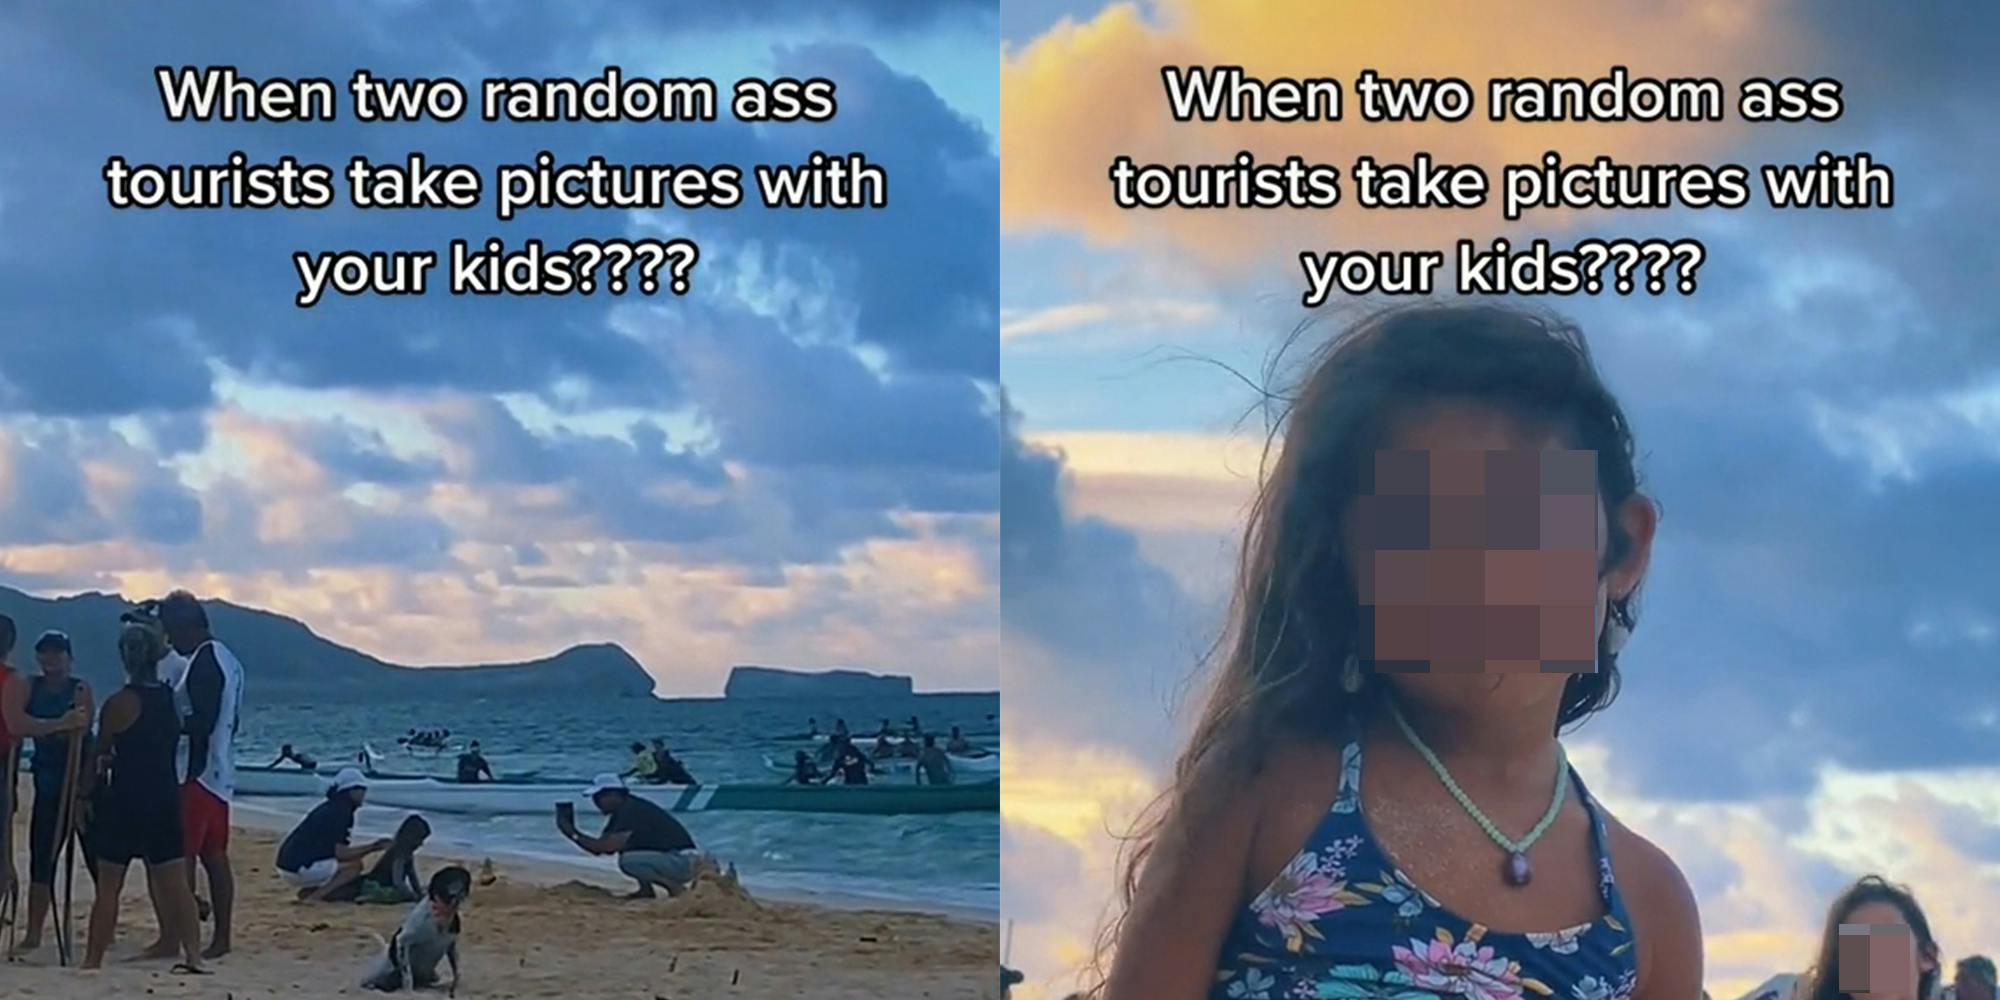 people taking pictures on the beach (l) child on beach (r) captioned "When two random ass tourists take pictures with your kids????"